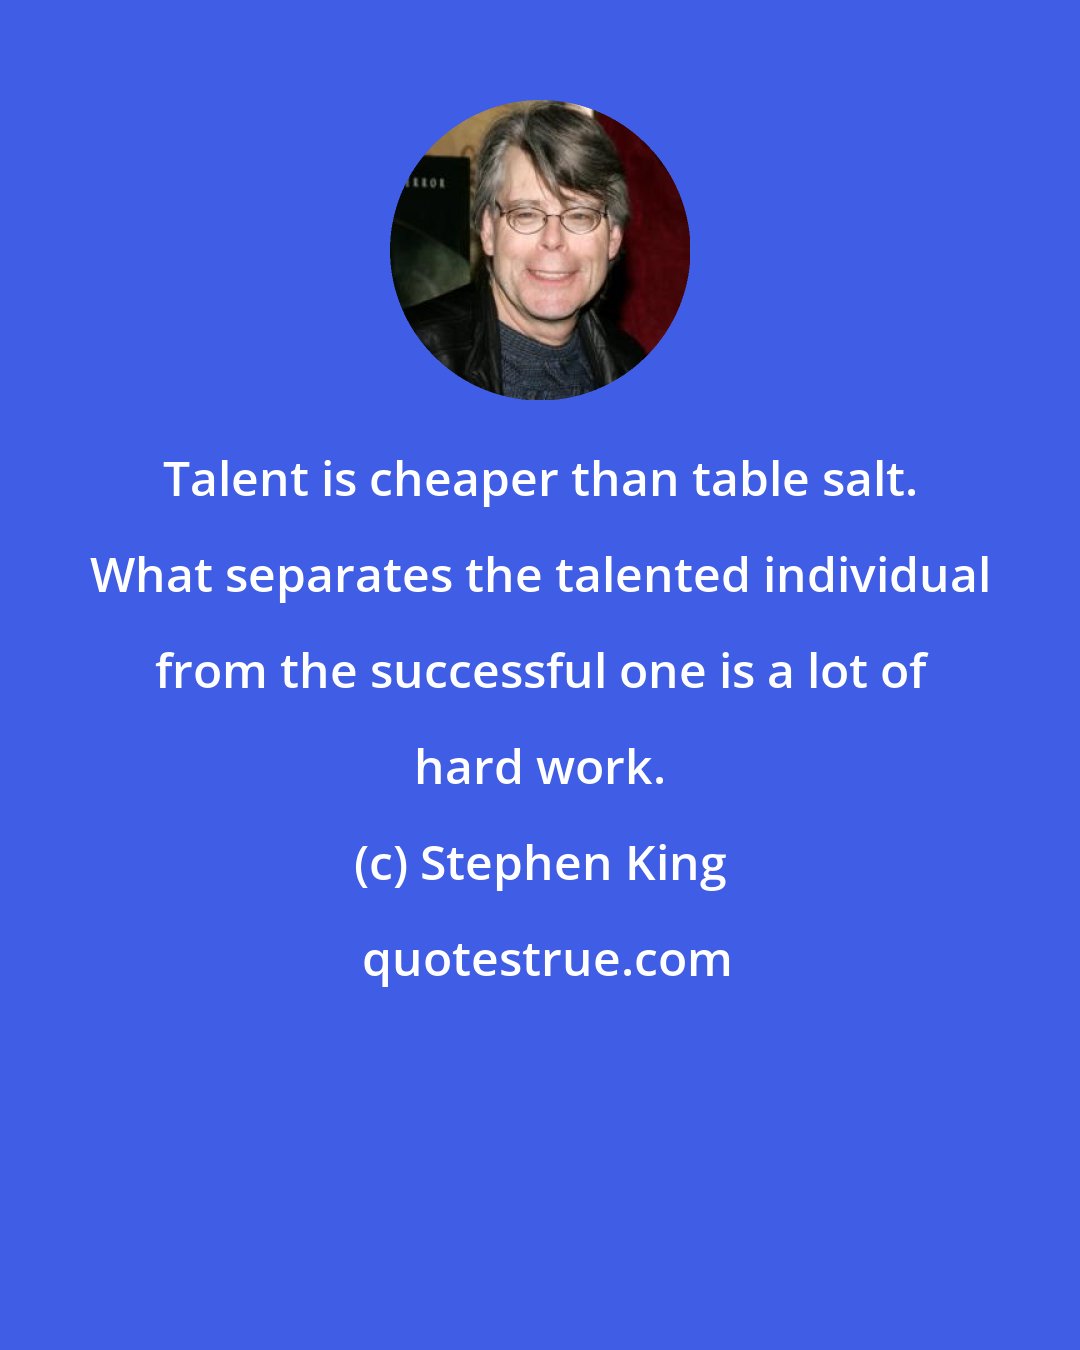 Stephen King: Talent is cheaper than table salt. What separates the talented individual from the successful one is a lot of hard work.